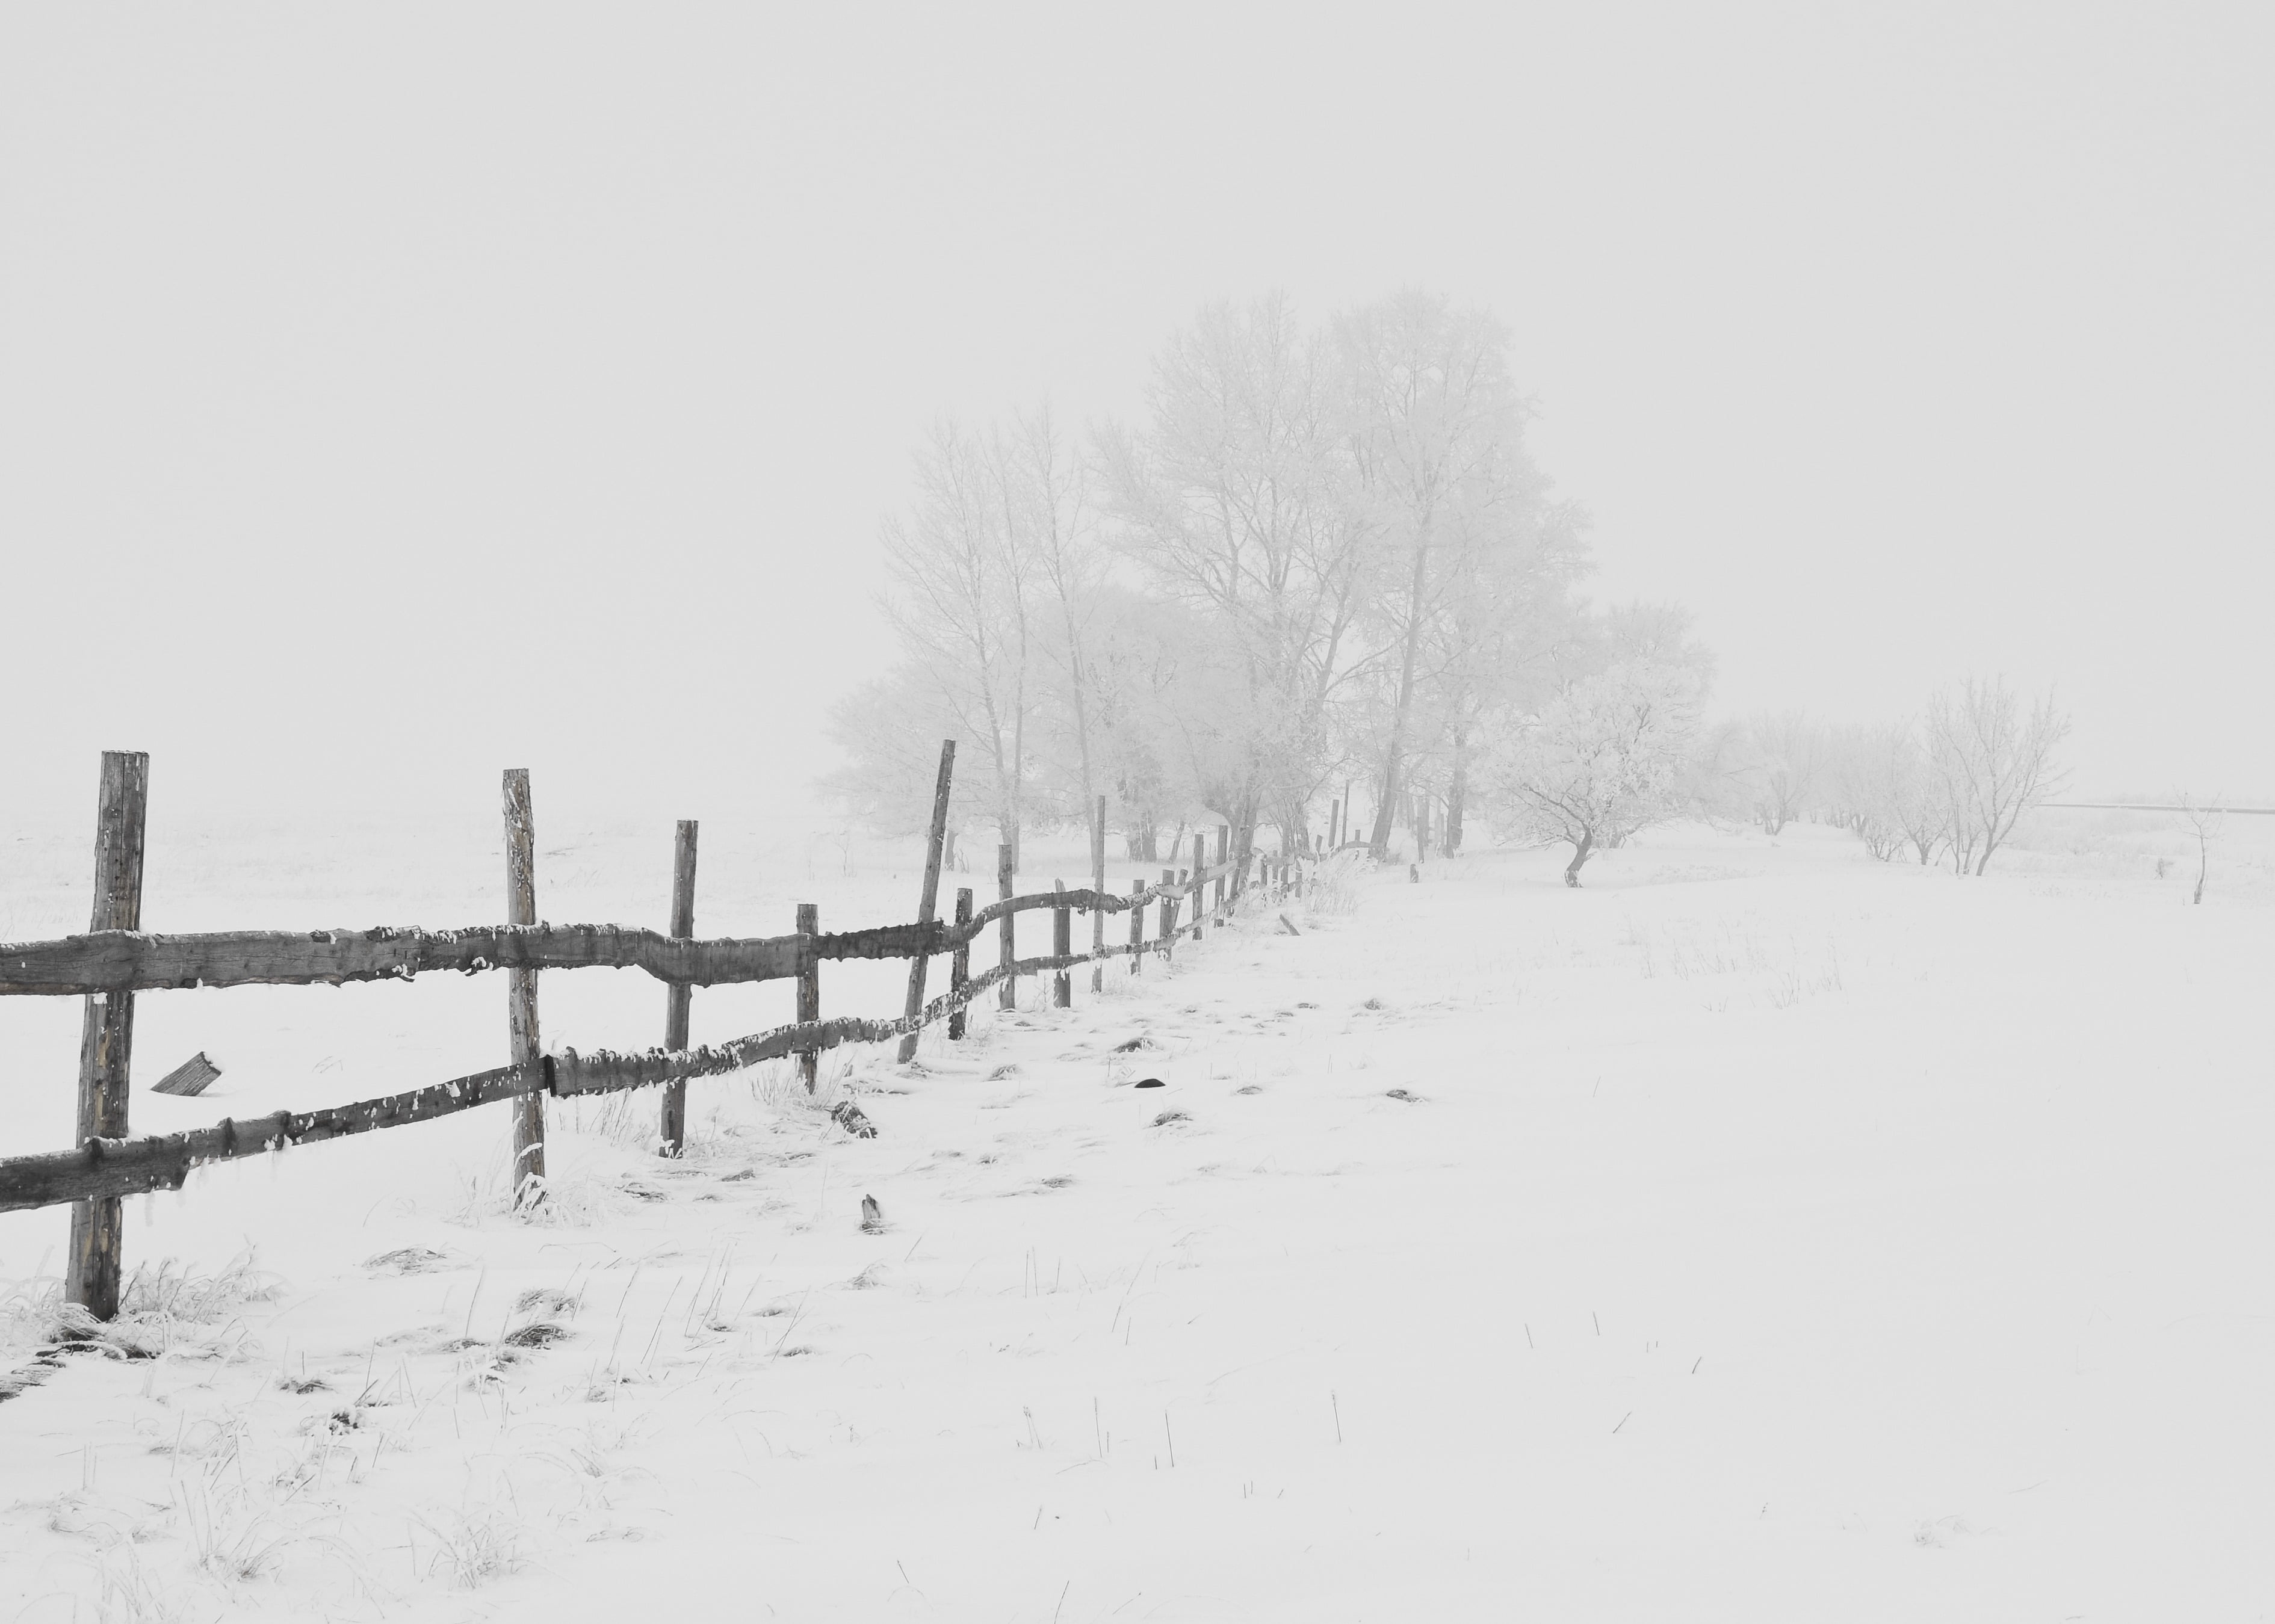 wooden fence covered in snow during daytime